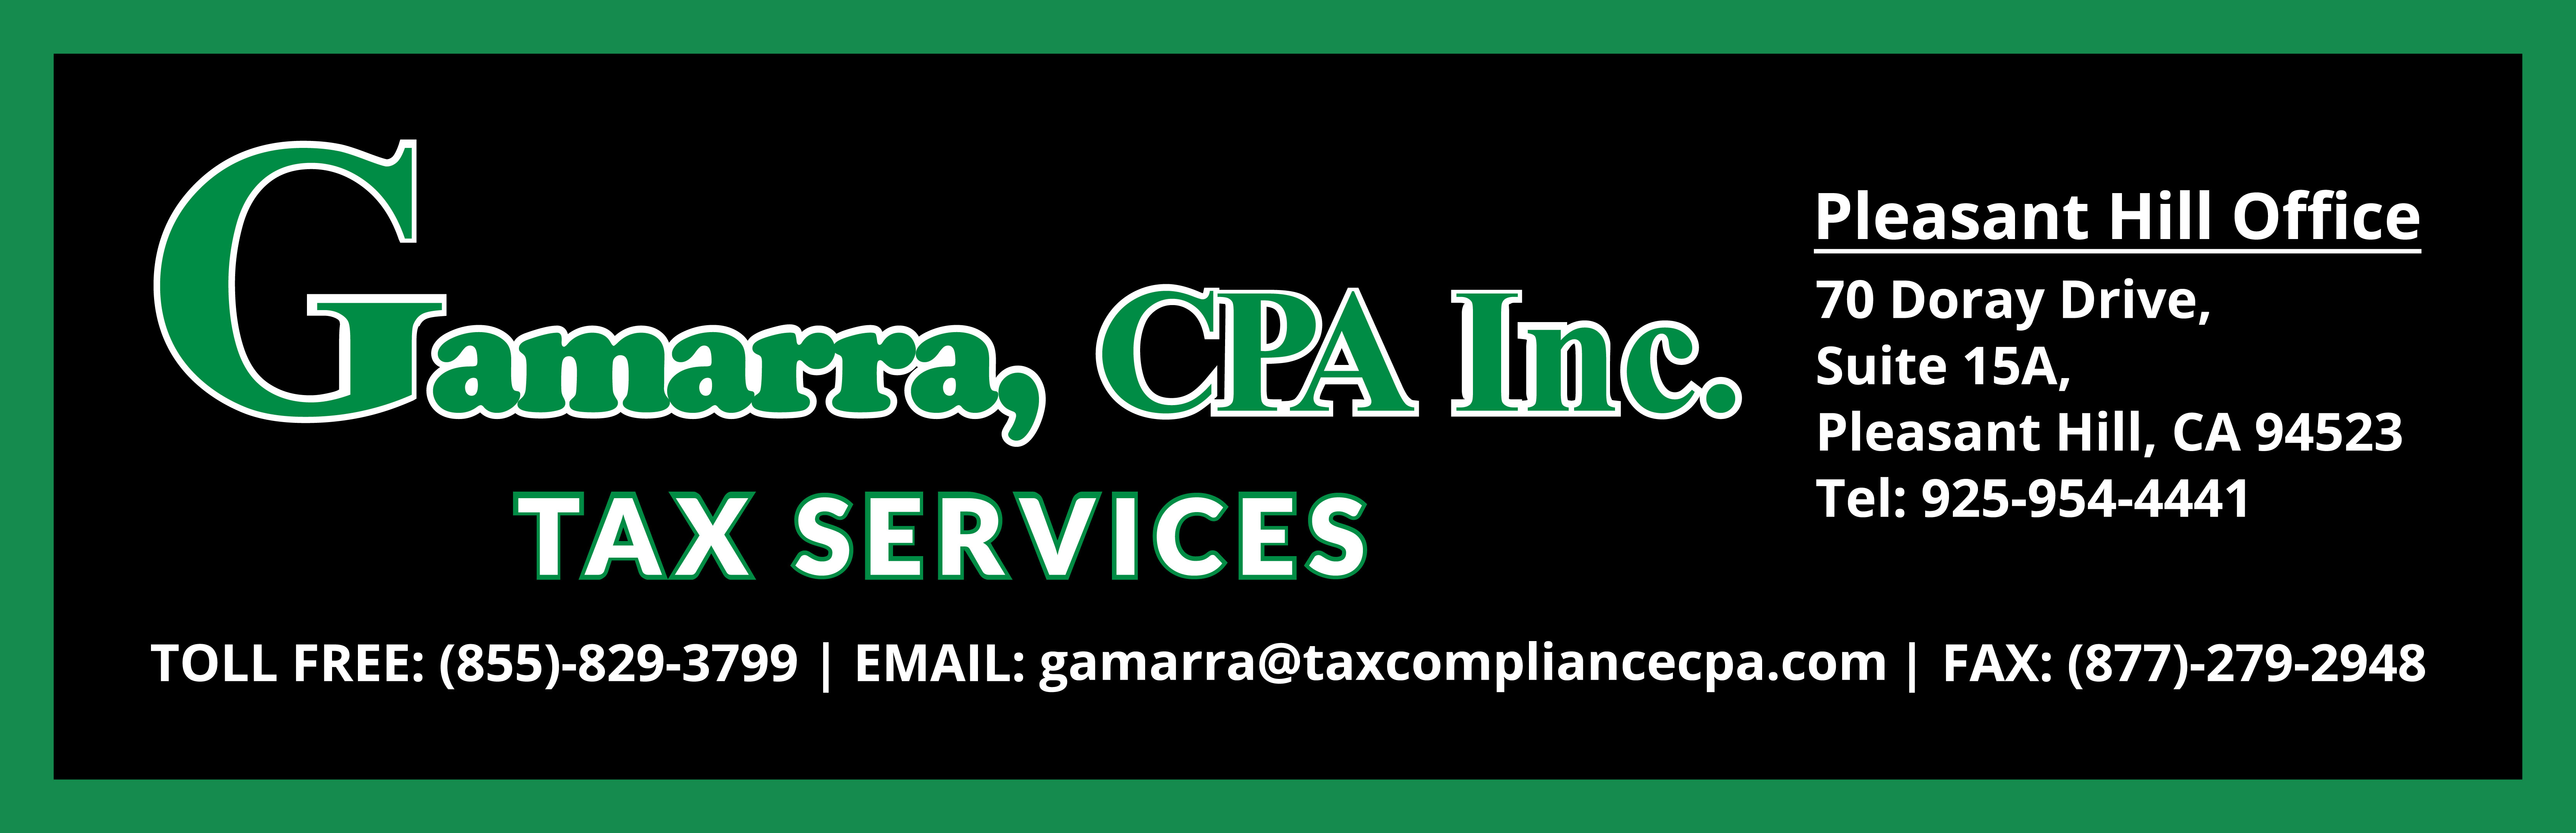  We have specialized for Tax assistance, offering ample help for tax deficiency notices, tax resolution, helping in tax matters, aiding in resolving your tax issues, and representing you in FTB tax compliance or Virginia Department of Tax compliance.